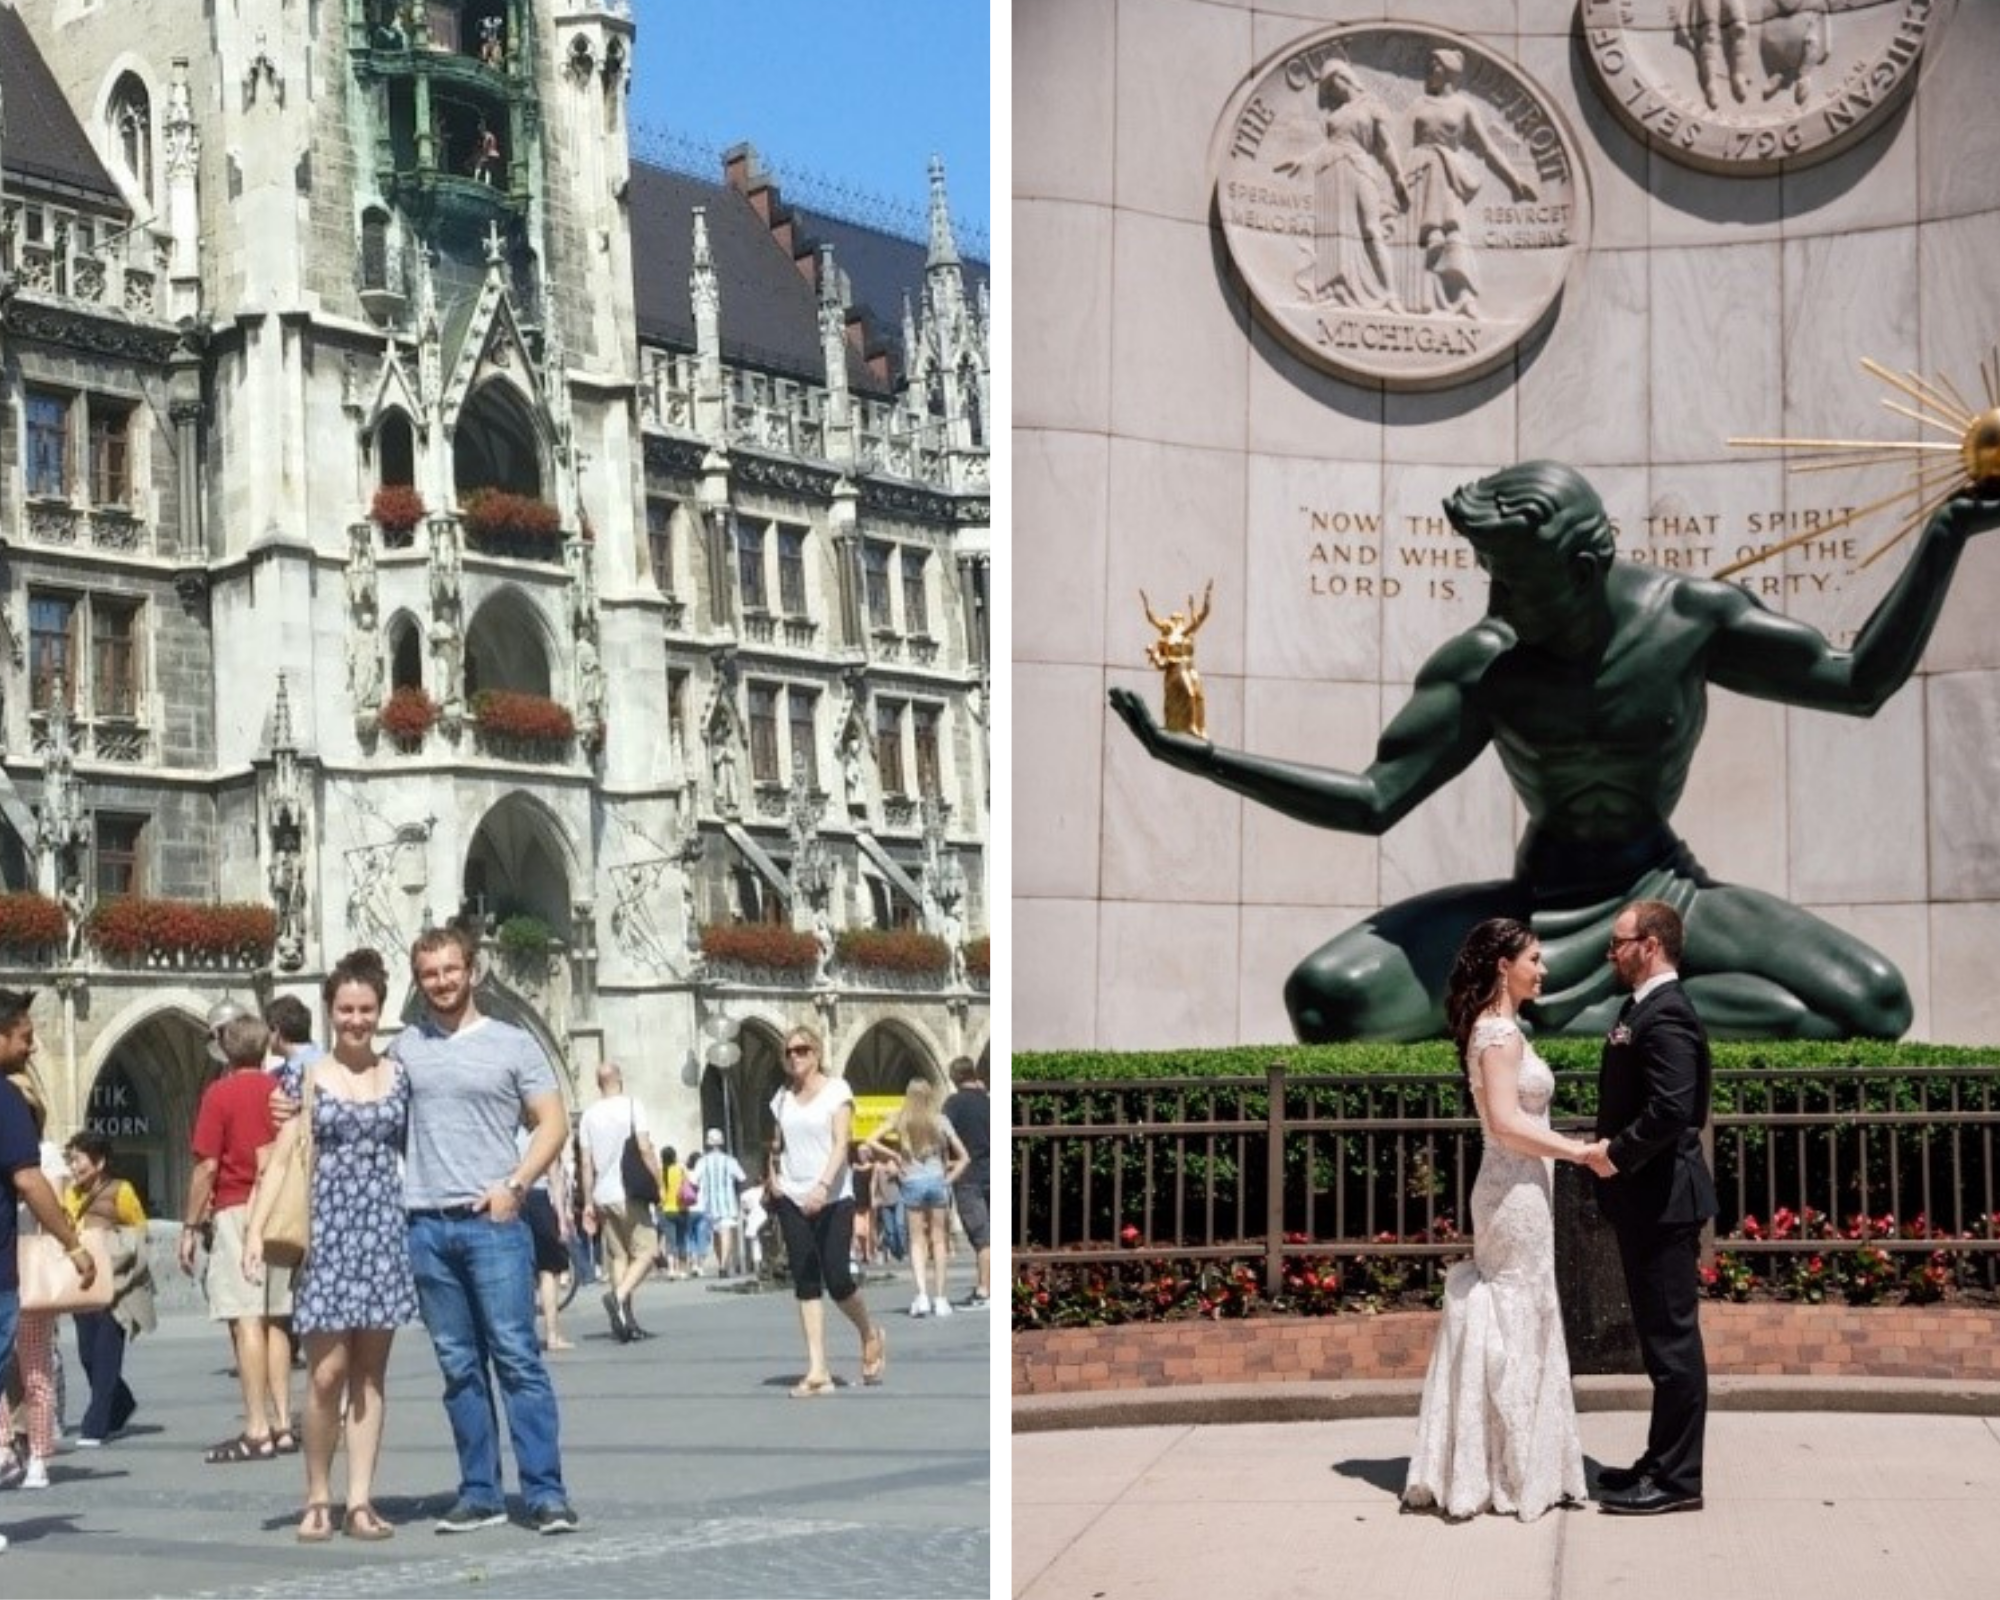 Kate and Danil at Marienplatz 2015. Married couple Kate and Danil in front of the Spirit of Detroit monument in May 2021